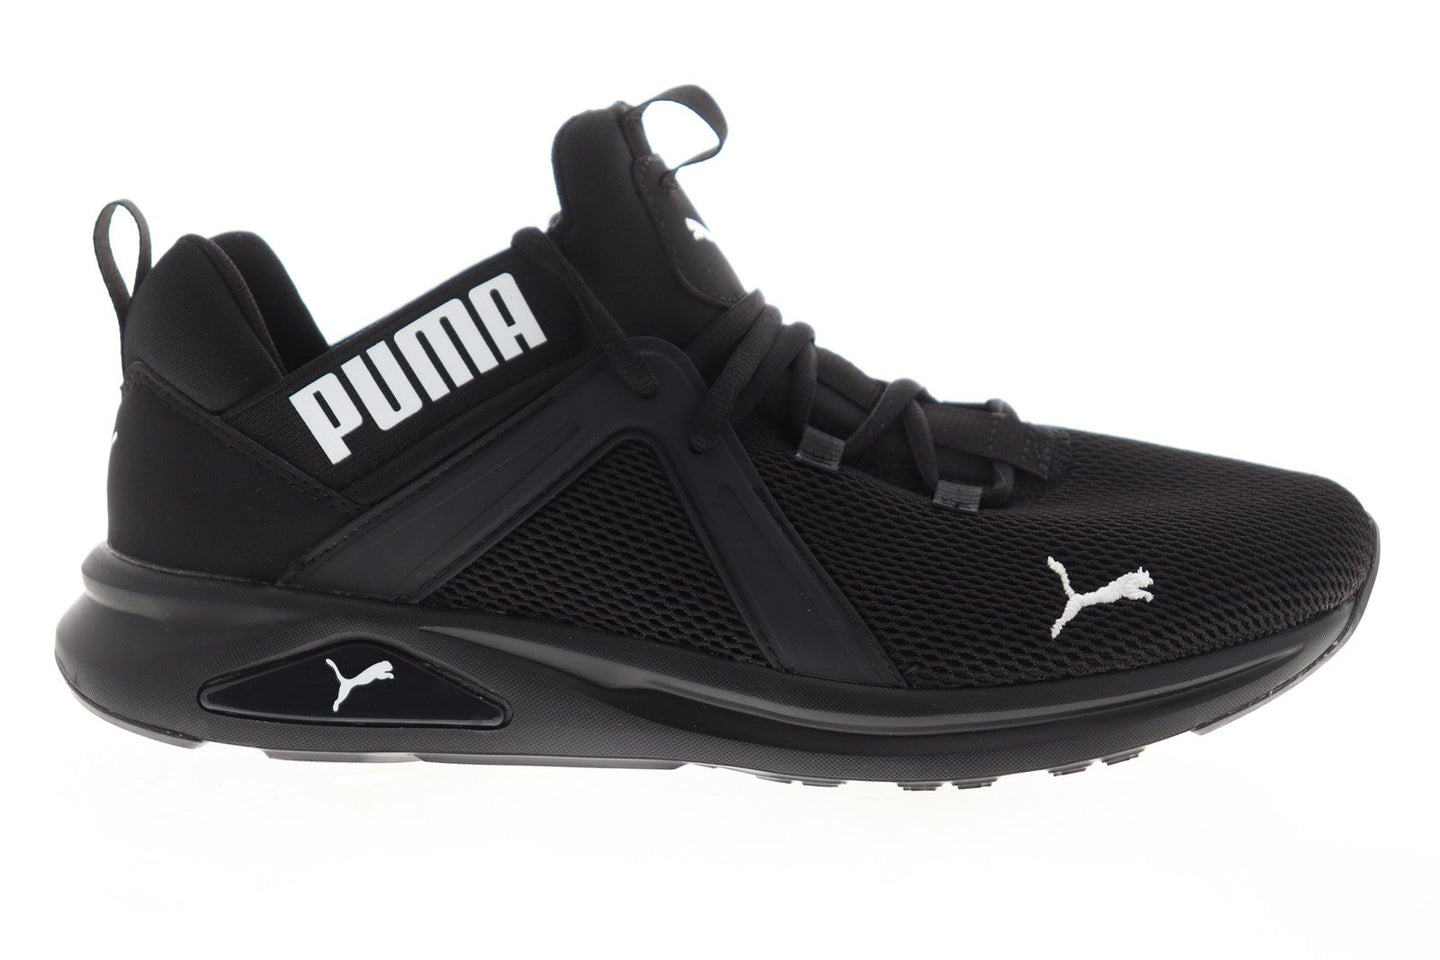 Puma Enzo 2 19324901 Mens Black Mesh Lace Up Athletic Running Shoes ...